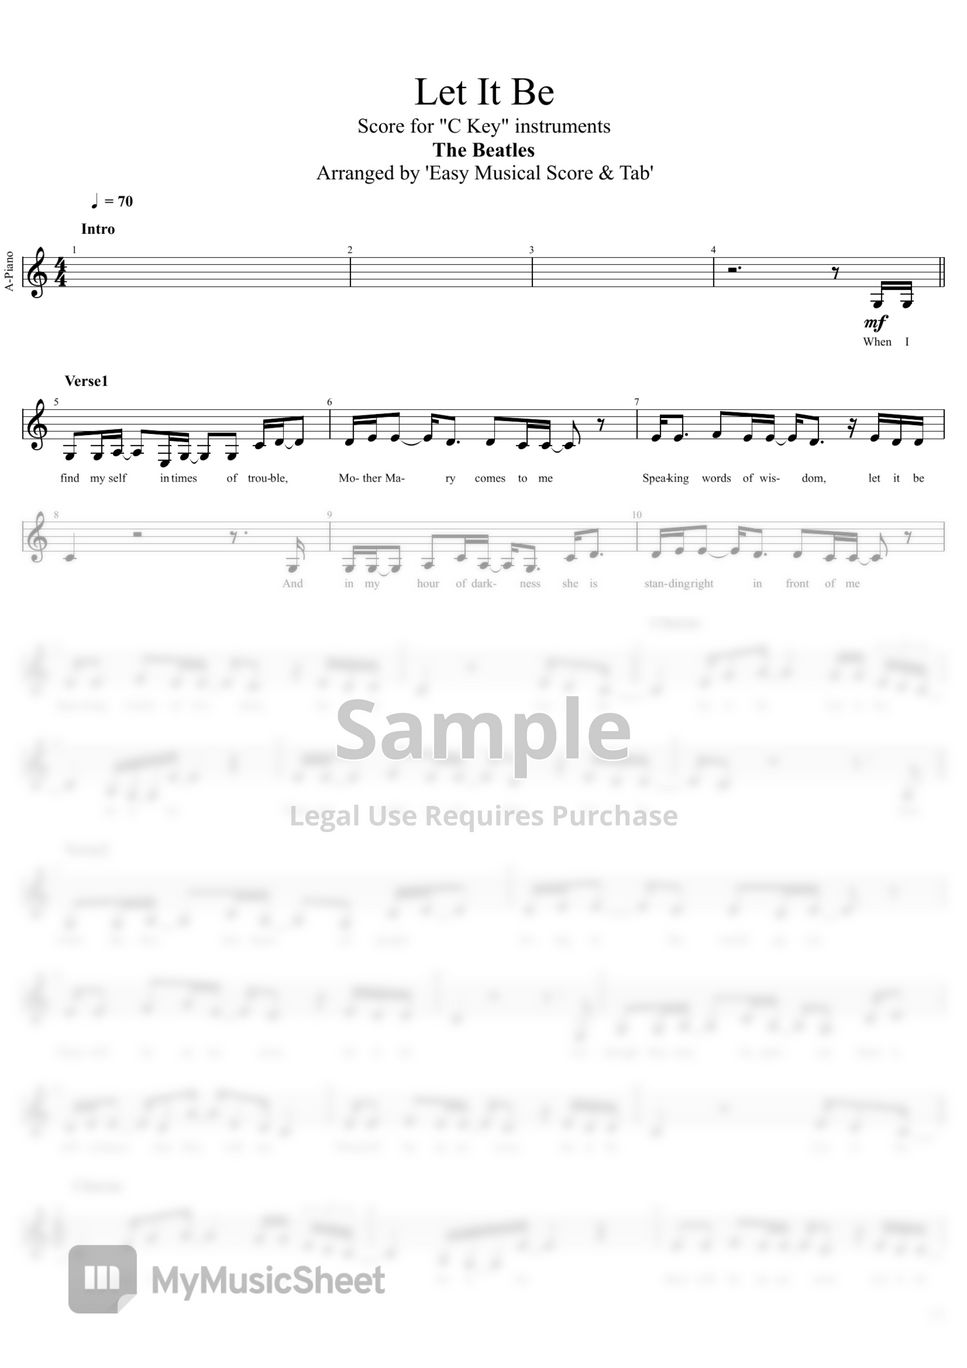 The Beatles - Let It Be (Score for "C Key" instruments) by EMST